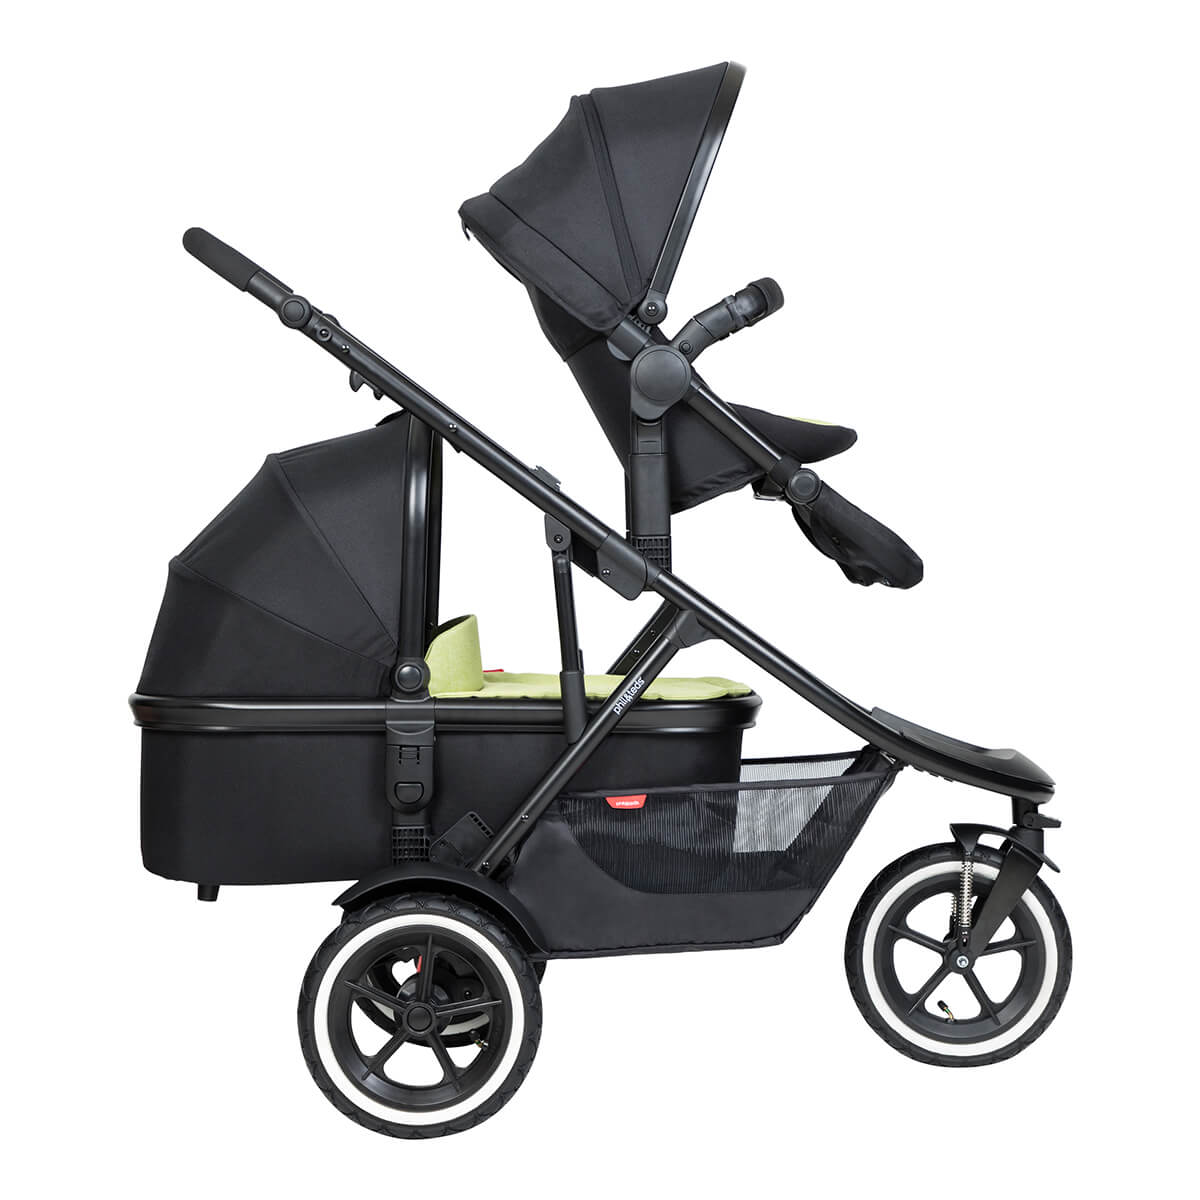 https://cdn.accentuate.io/4417276117026/19437753499826/philteds-sport-buggy-with-double-kit-extended-clip-and-snug-carrycot-side-view-v1626482705691.jpg?1200x1200